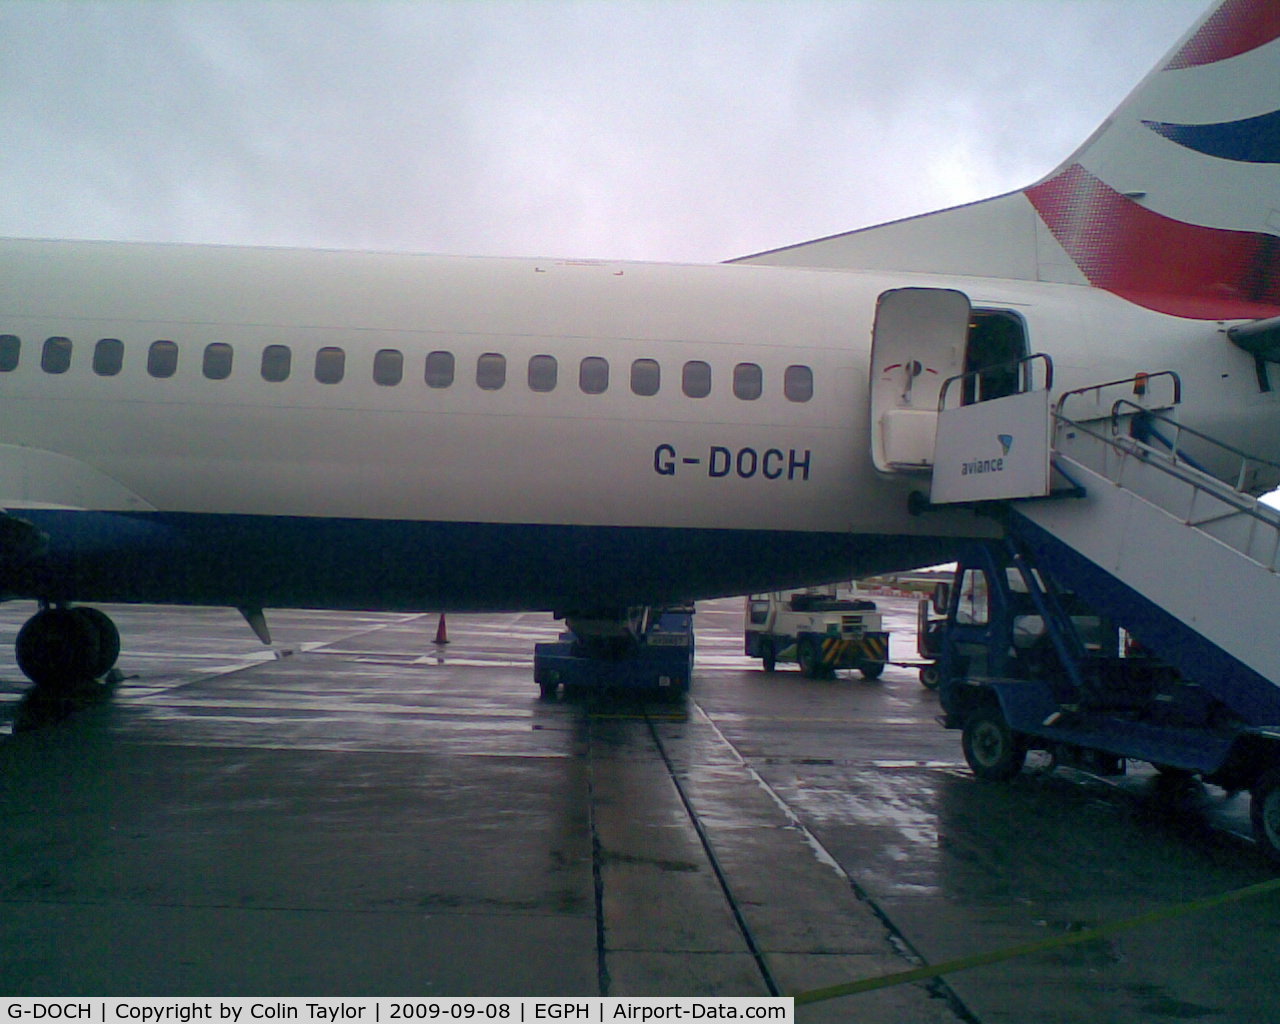 G-DOCH, 1991 Boeing 737-436 C/N 25428, Rear Fuselage as seen just after deplaning at Edinburgh Airport UK after a domestic flight from London Gatwick